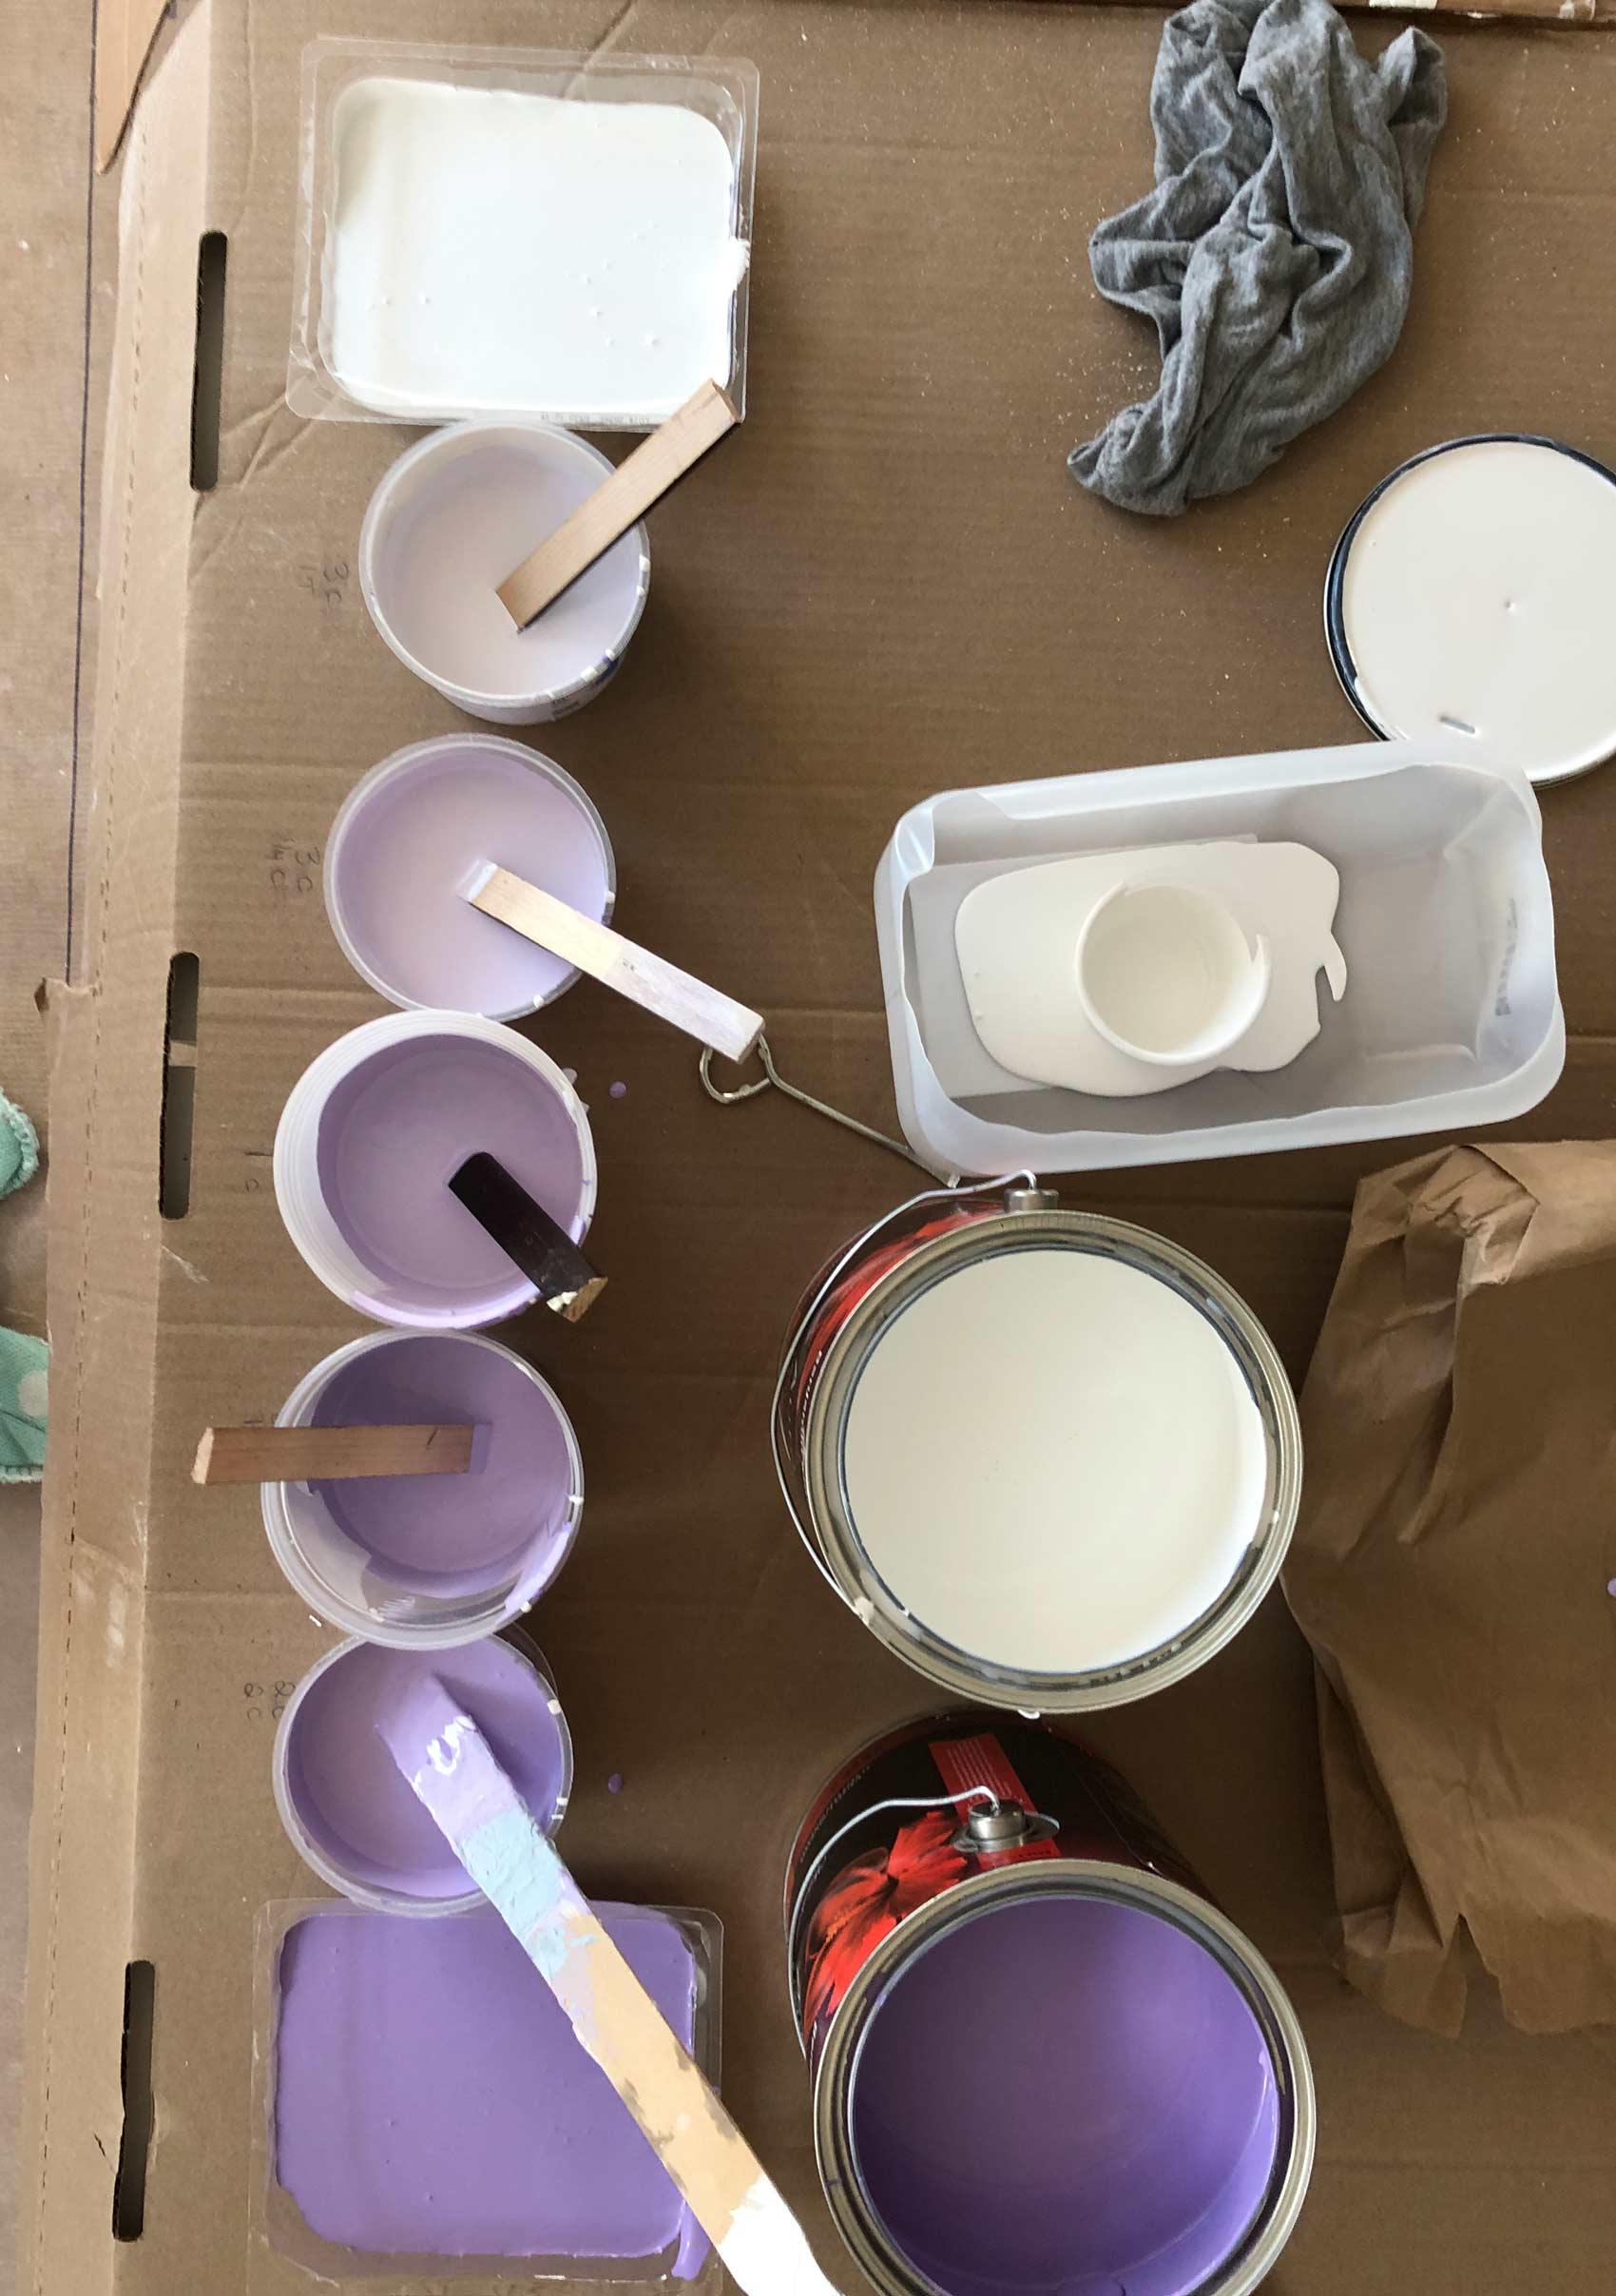 7 shades of vegan paint from white to purple